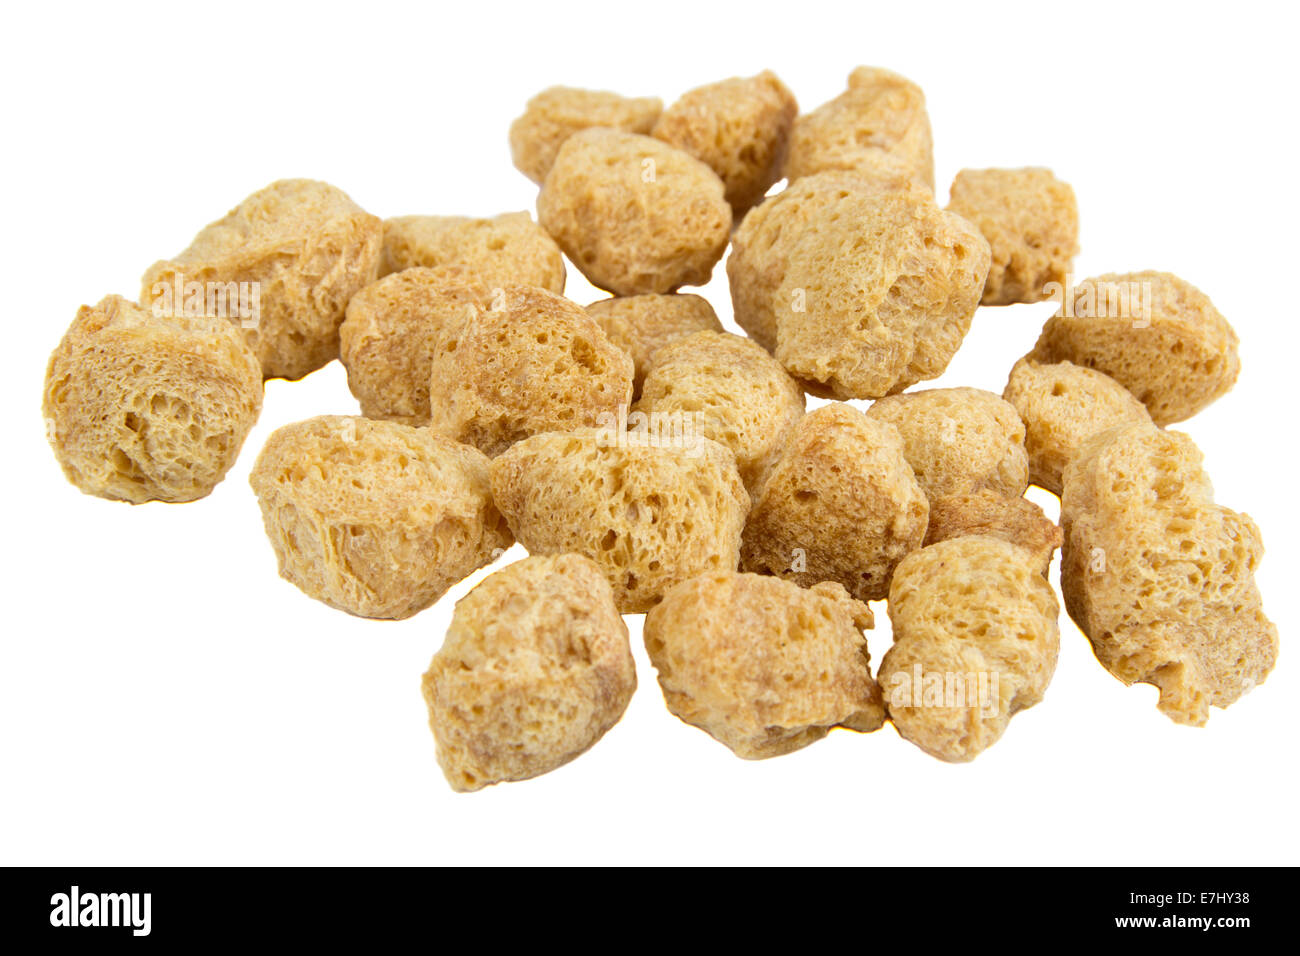 Pile of Textured Soy Protein (Soy Meat) Isolated on White Background Stock Photo